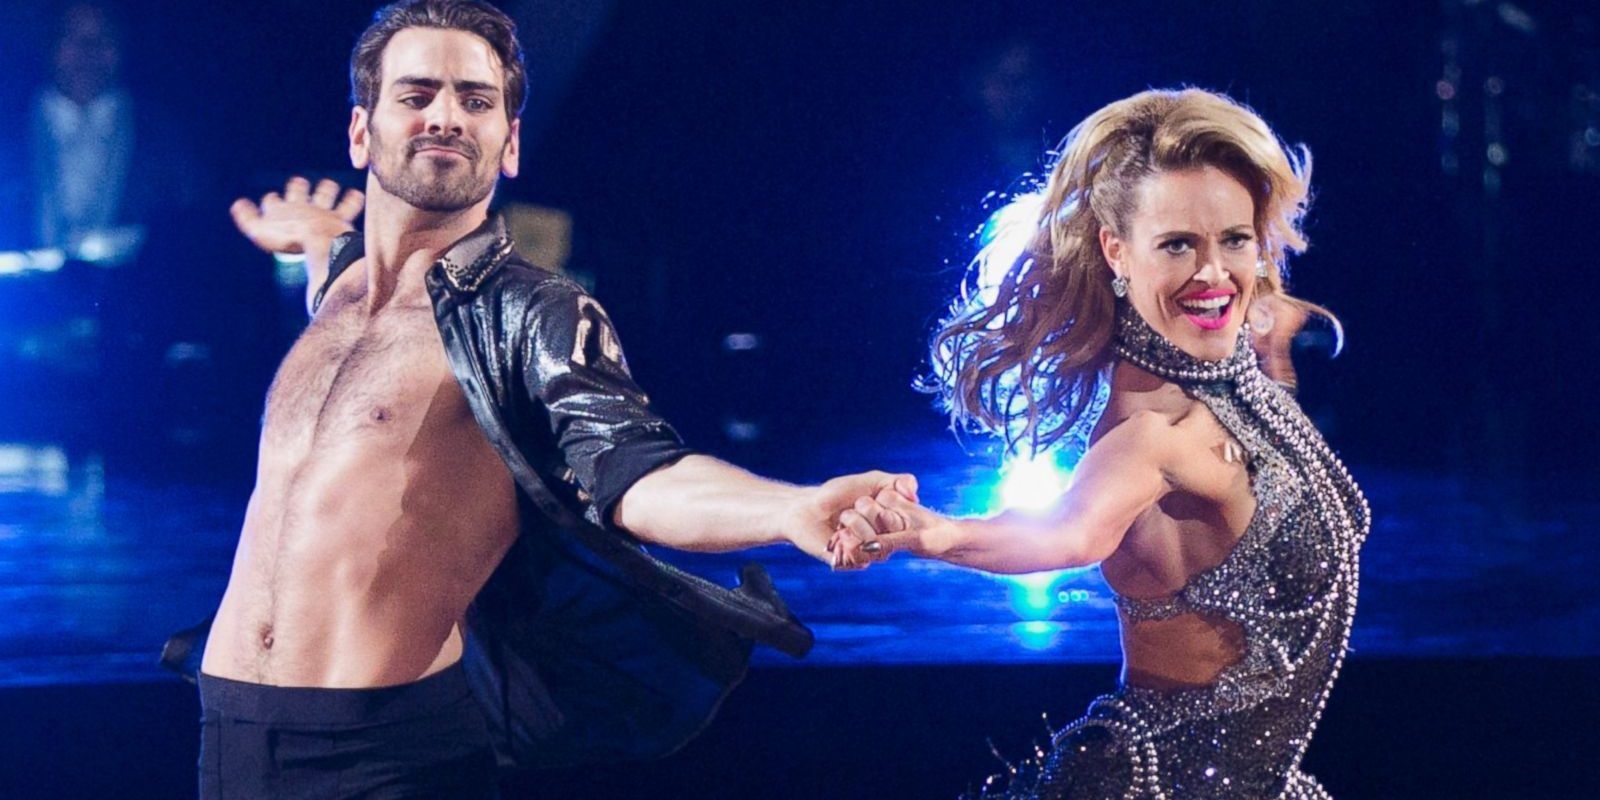 DWTS: Nyle DiMarco Speaks Out About Childhood Abuse From Father